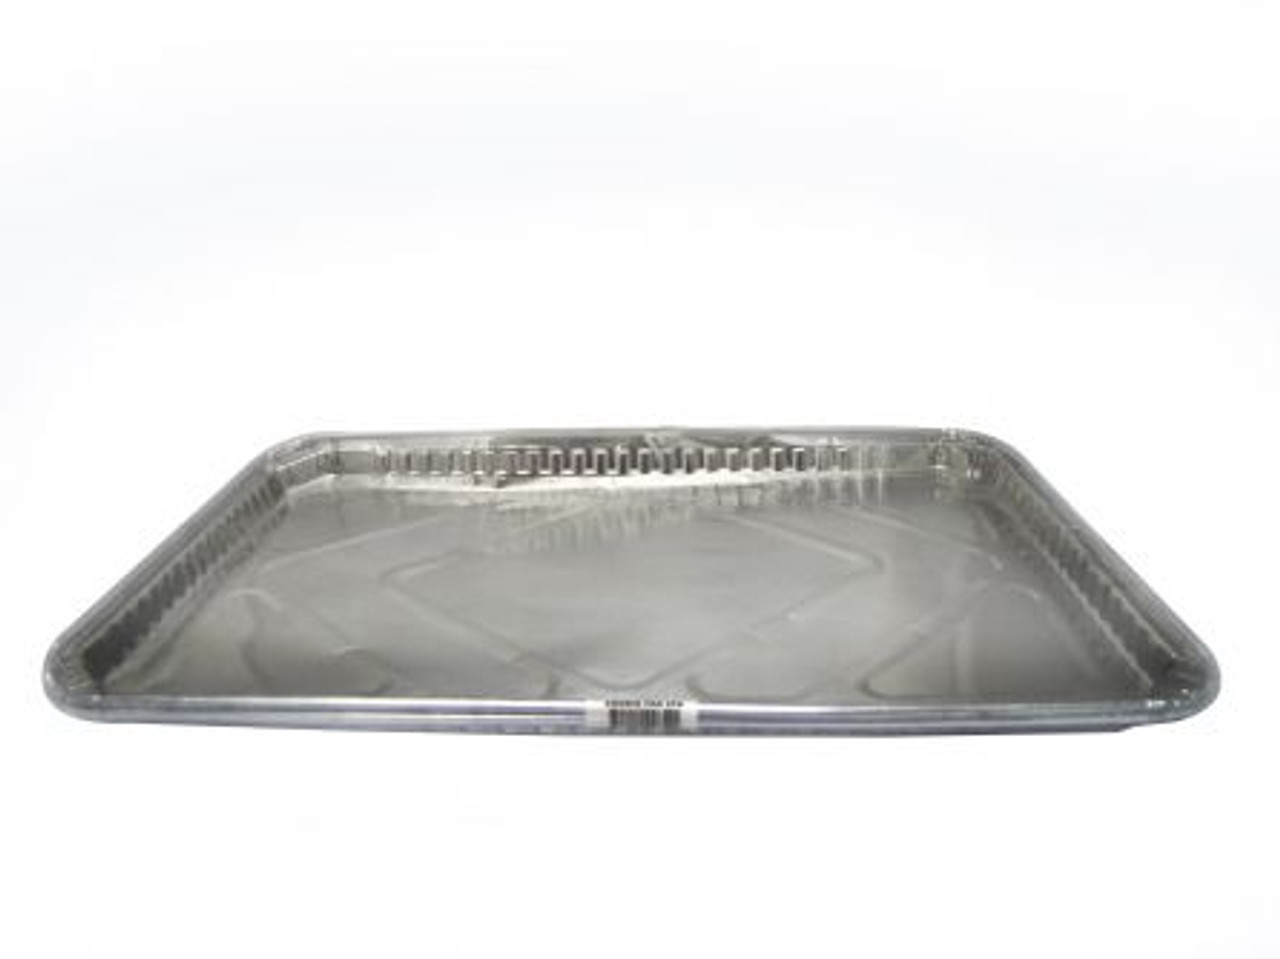 https://cdn11.bigcommerce.com/s-hgqmwywp99/images/stencil/1280x1280/products/49332/44123/aluminum-disposable-oven-liners-18-x16-144ct-3__39855.1675880312.jpg?c=1?imbypass=on